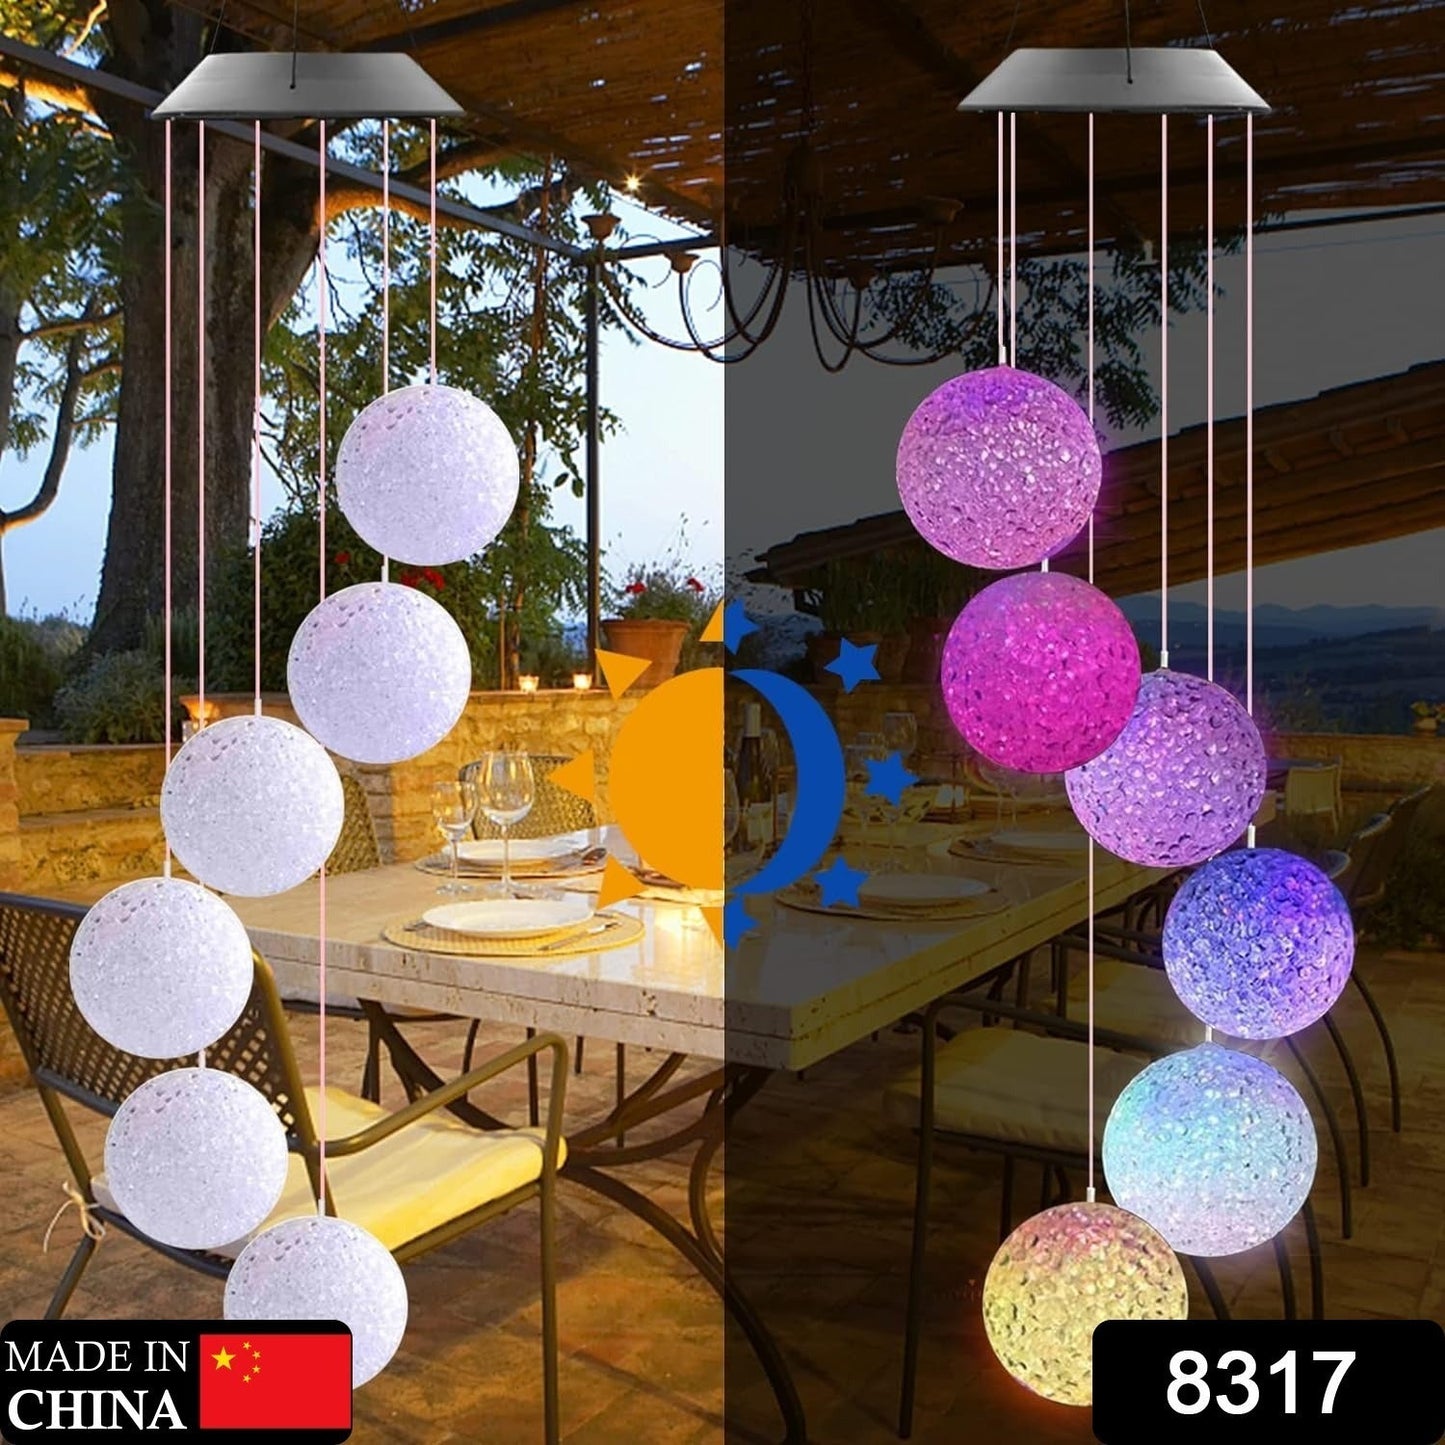 8317 Solar Crystal Ball Color Changing Solar Powered LED Hanging Light for Patio Yard Garden Home Outdoor Night Decor, Gifts